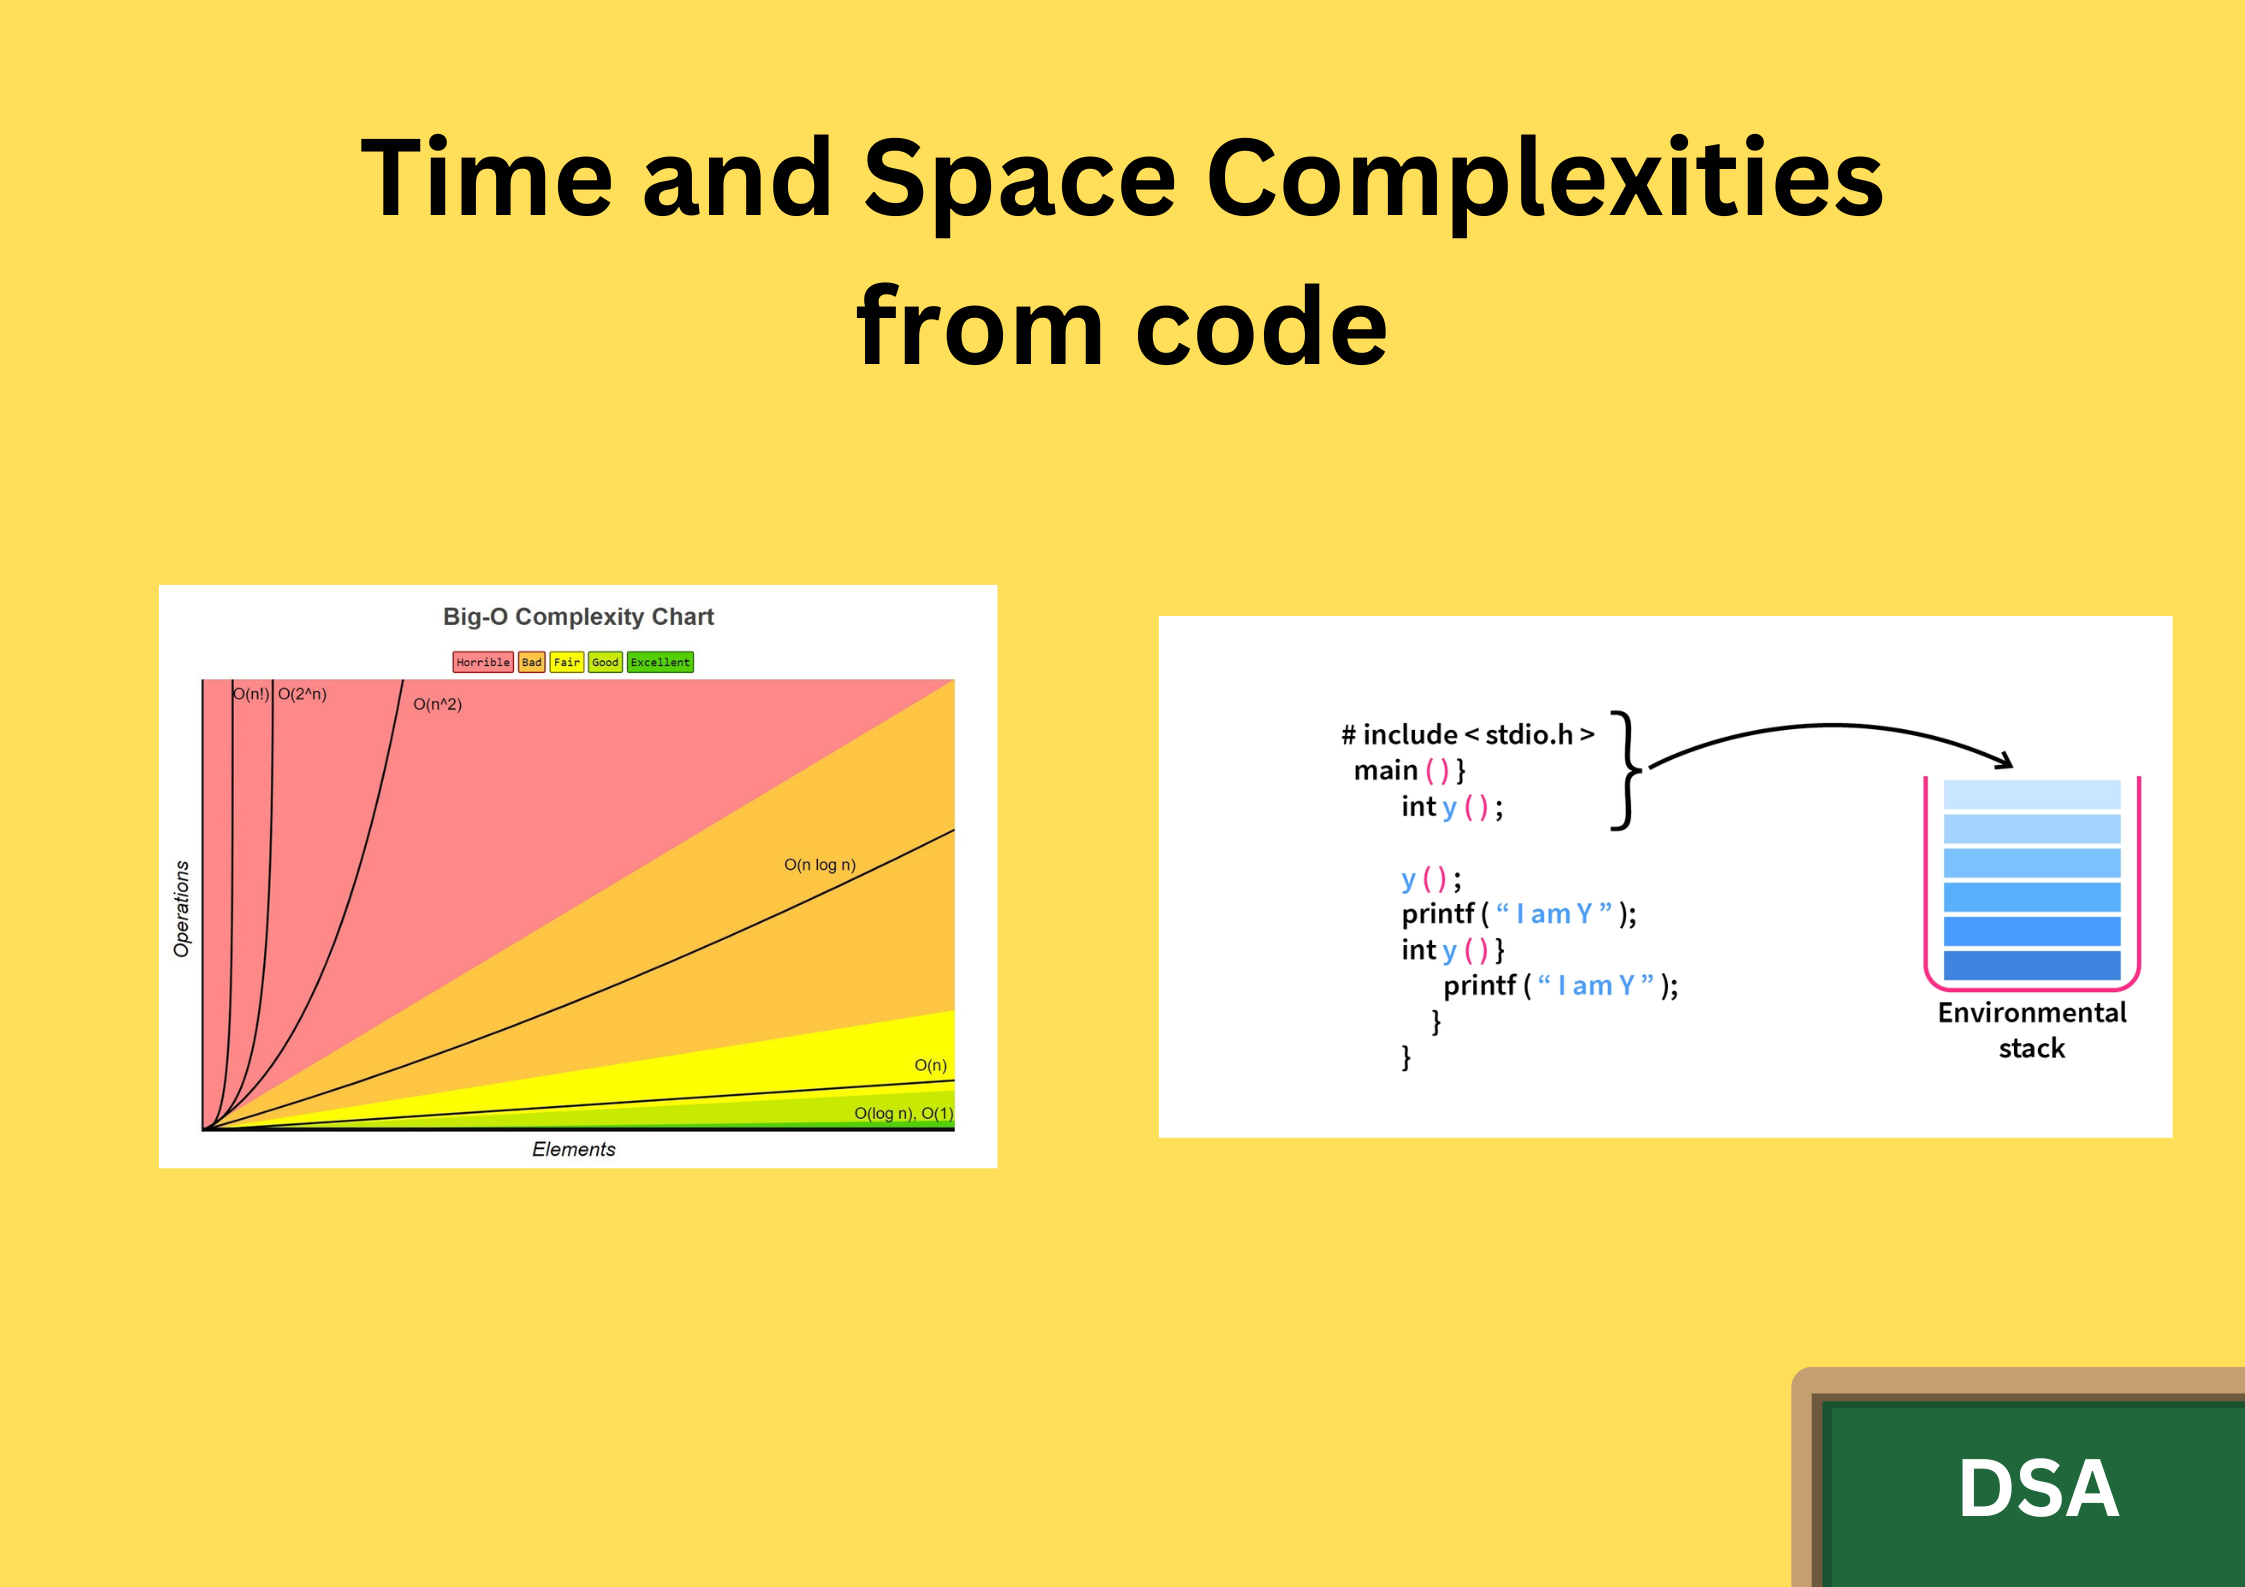 Time and Space Complexities from code